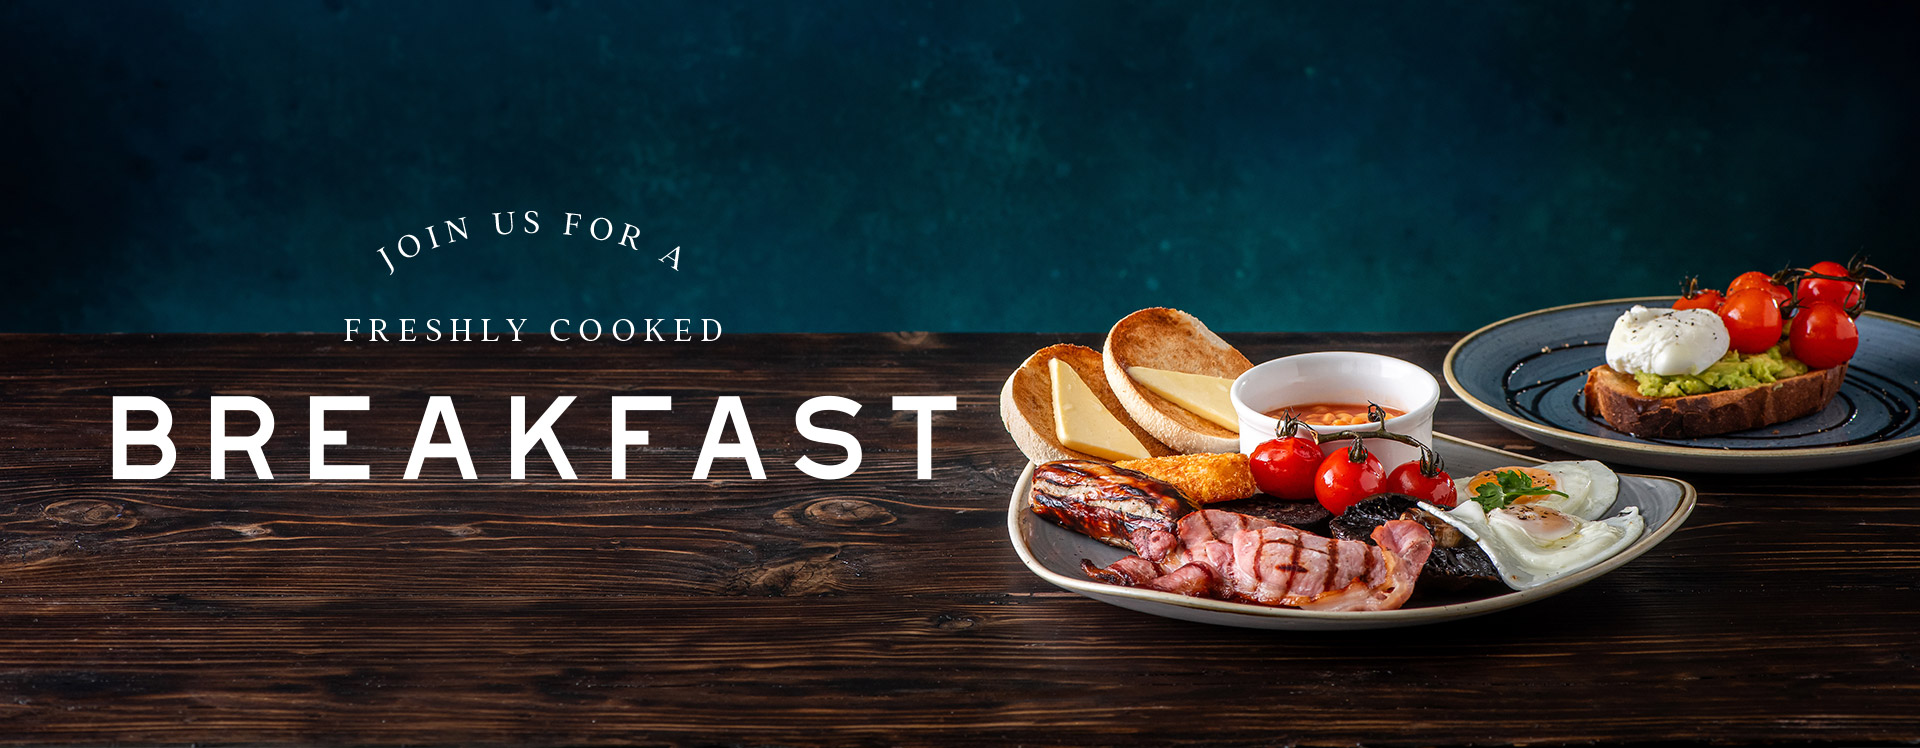 Breakfast at Crown, Oxford - Book a table